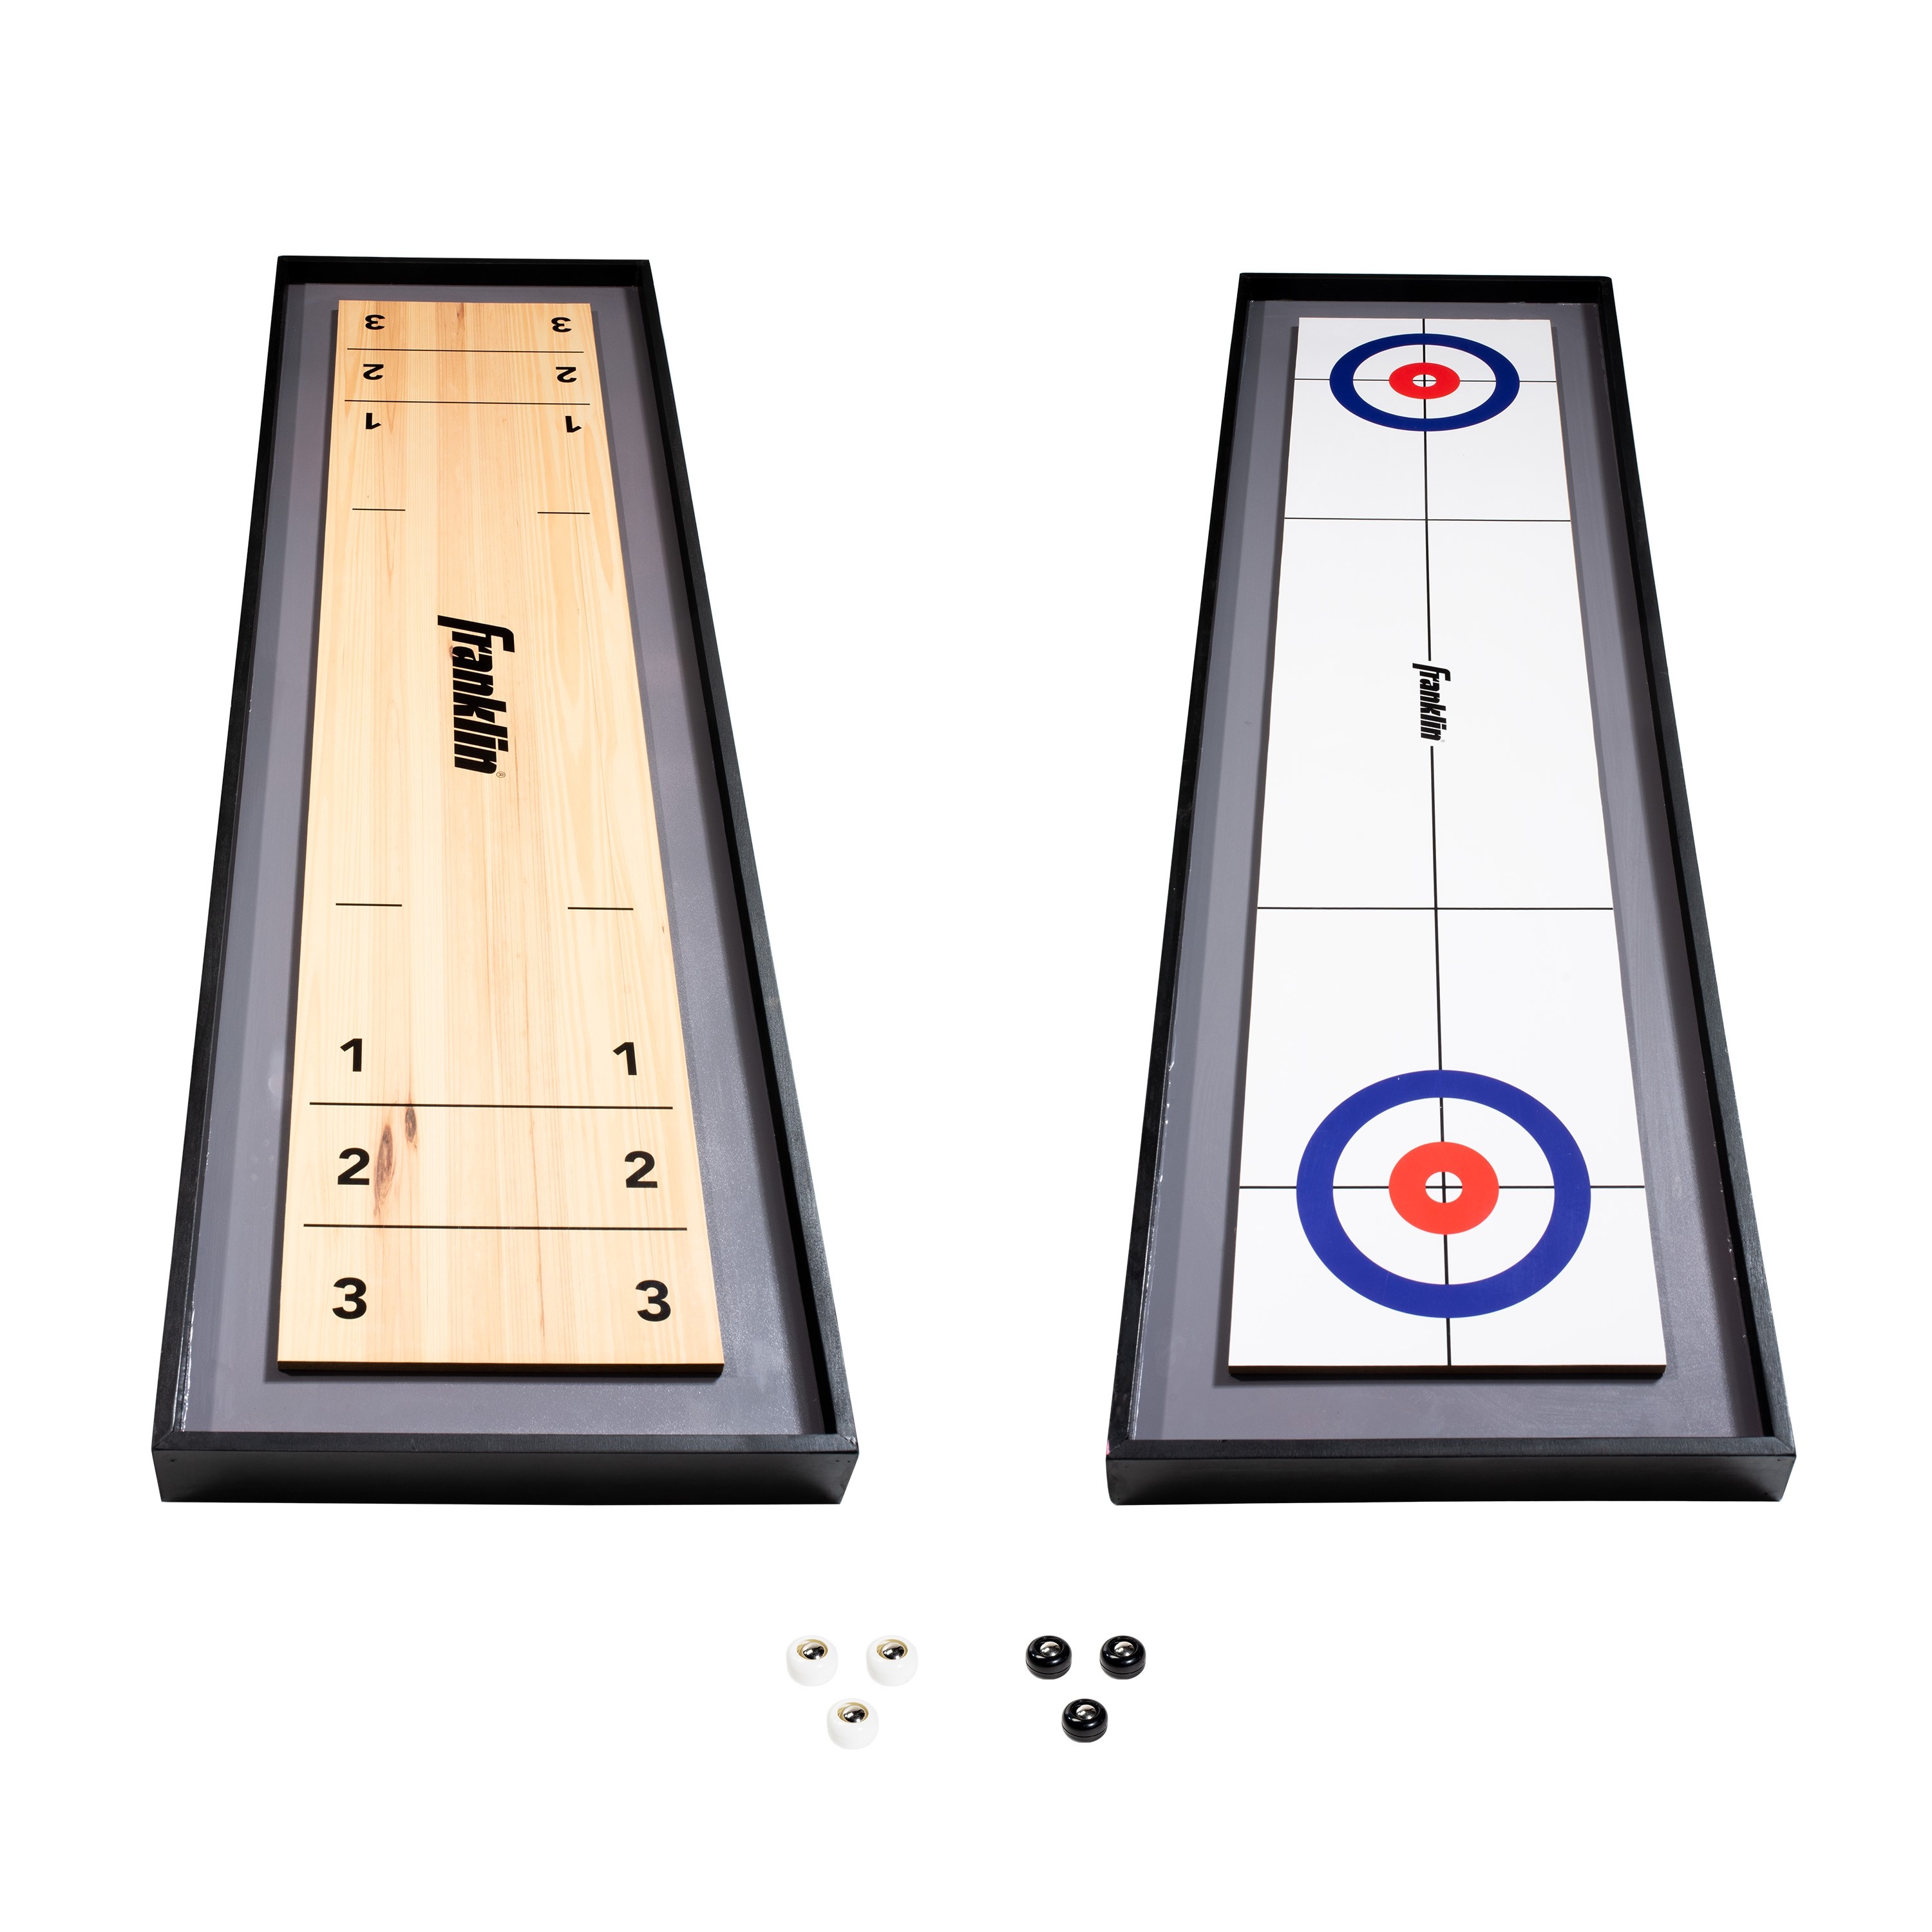 Details about   Shuffleboard and Curling 2 in 1 Board Game Set Mini Tabletop Bocce Family Games 